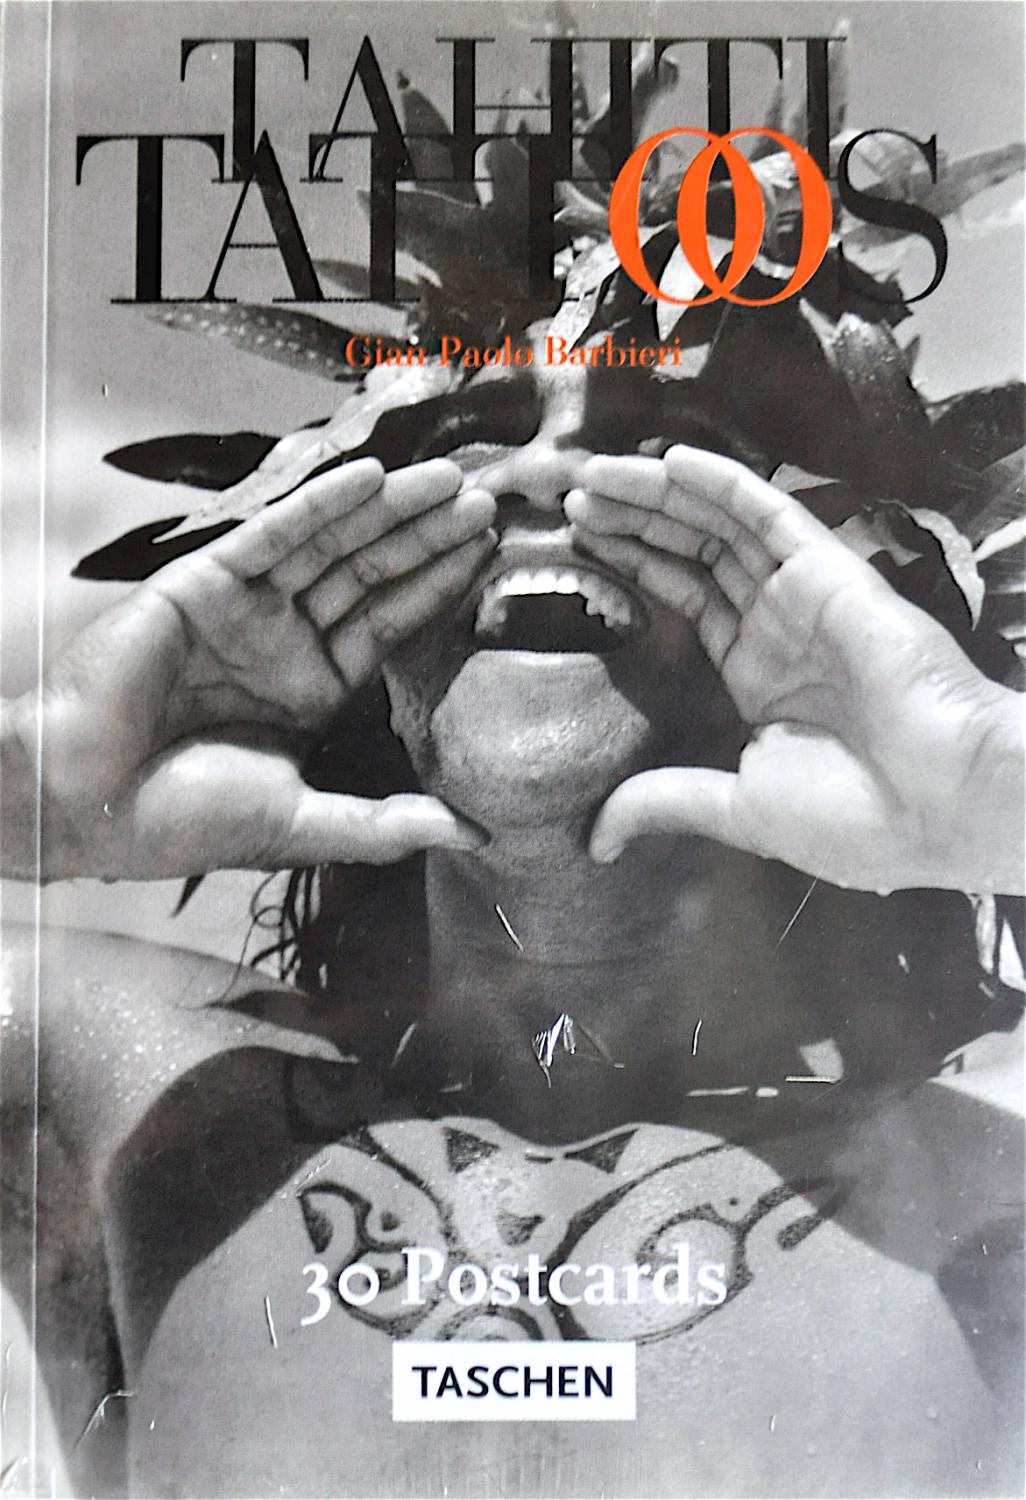 Tahiti Tattoos de Barbieri, Gian Paolo: New Unbound (1998) First Edition.